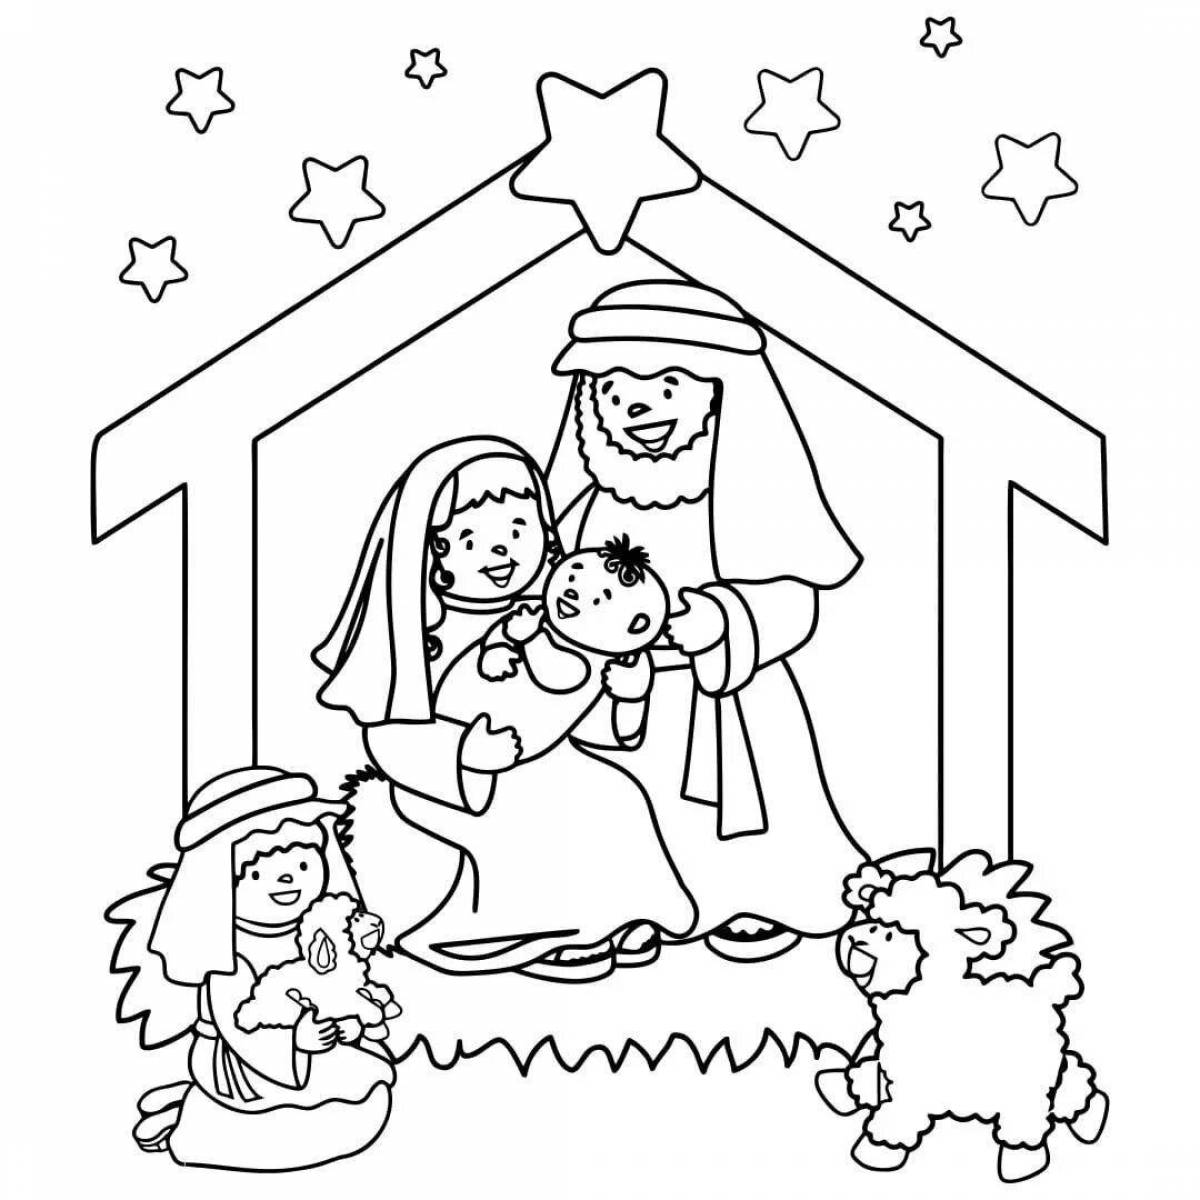 Exciting Christmas coloring book for 3-4 year olds